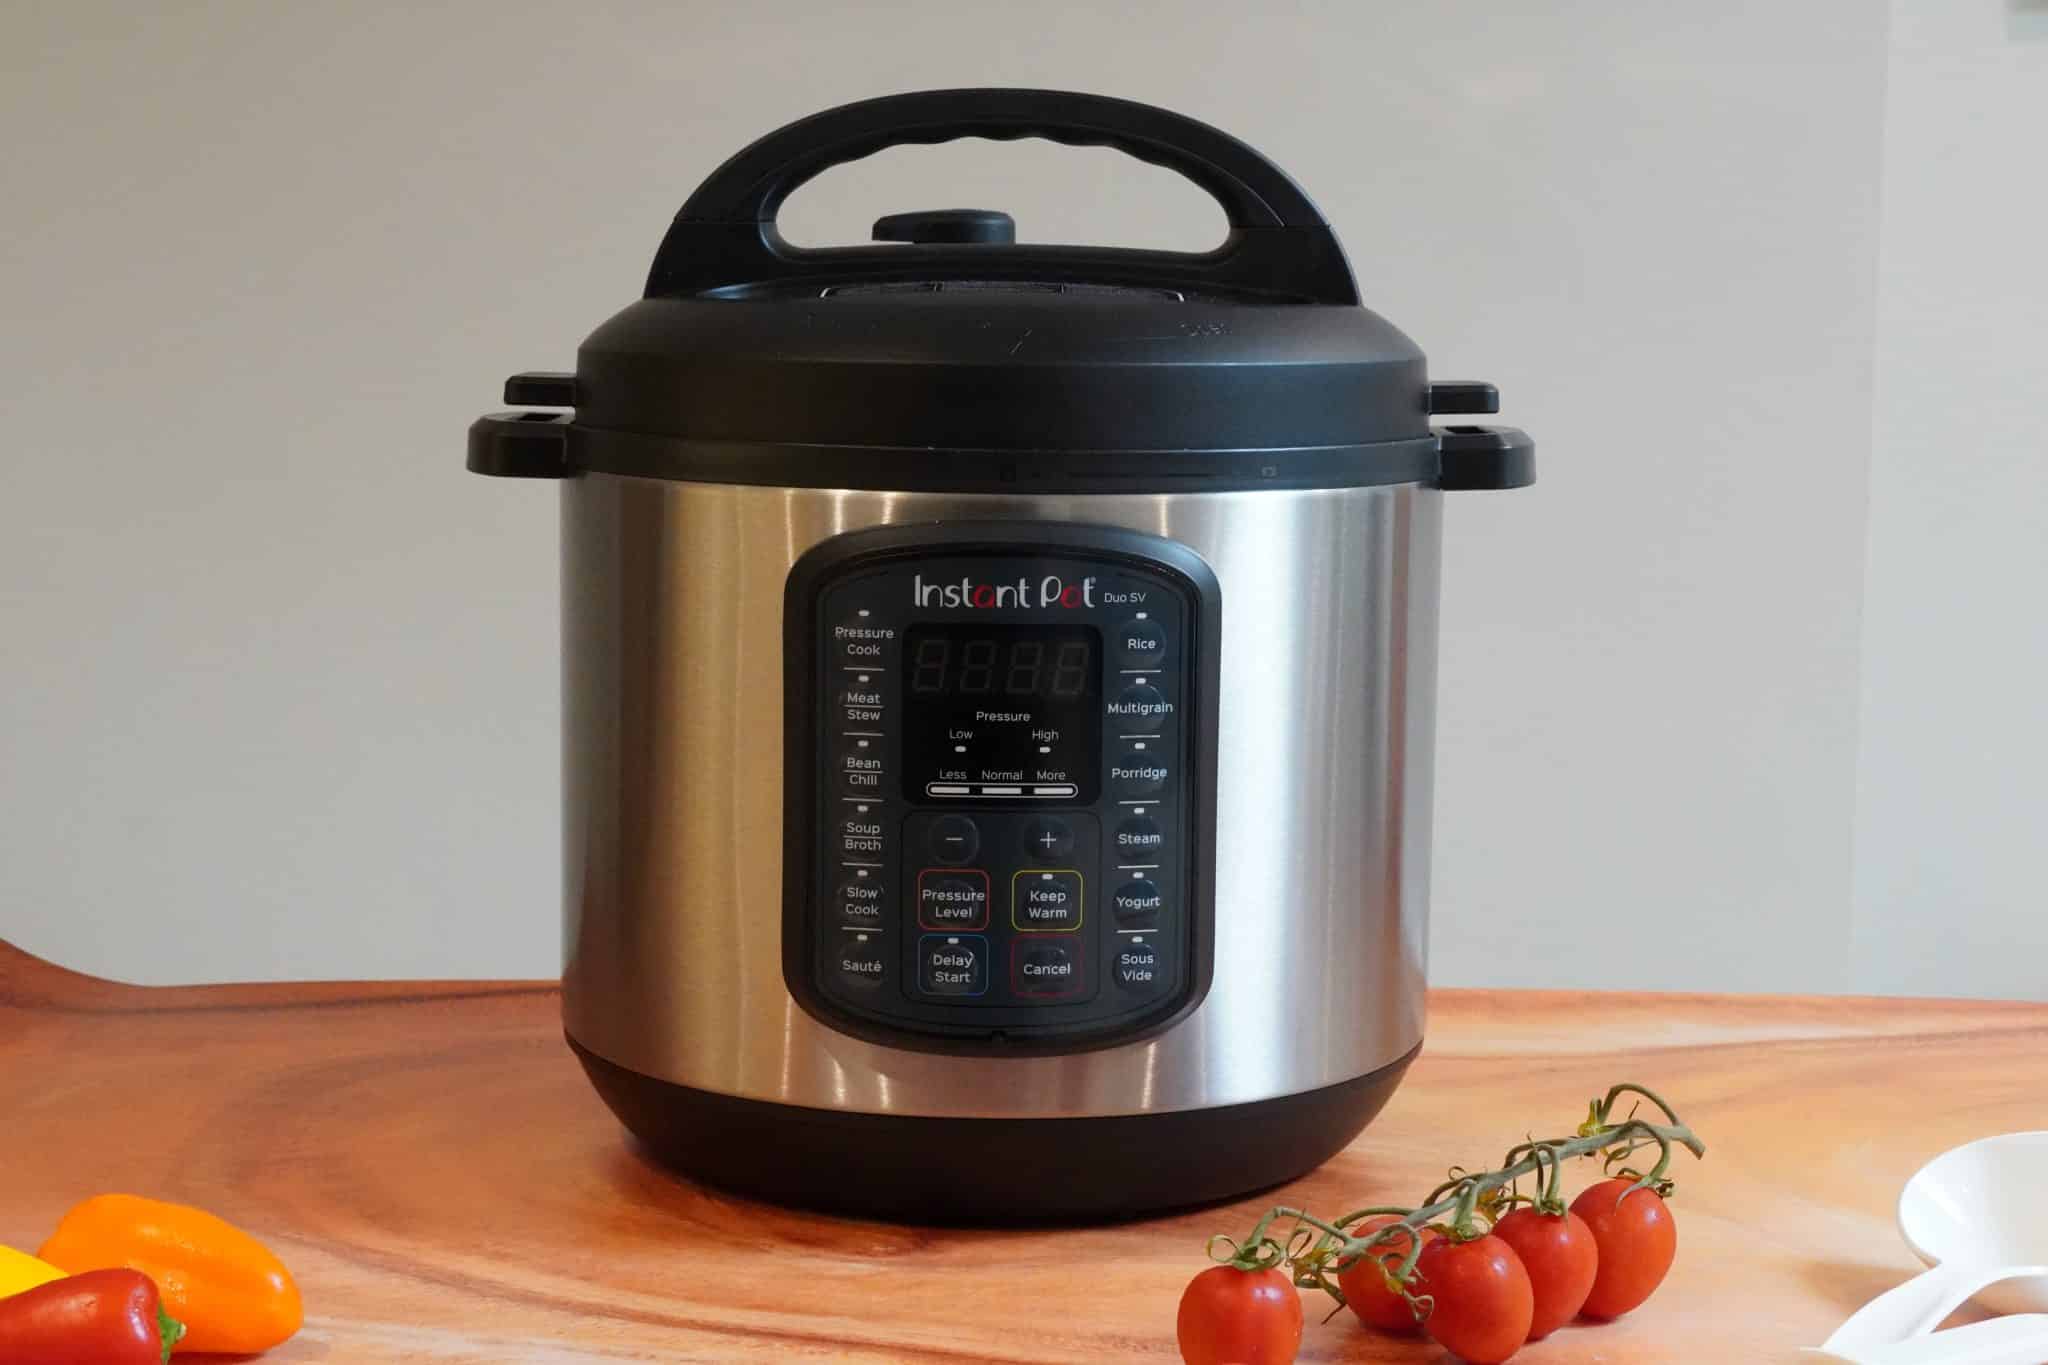 Are Instant Pots Allowed in Dorm Rooms? - Everything You Need To Know